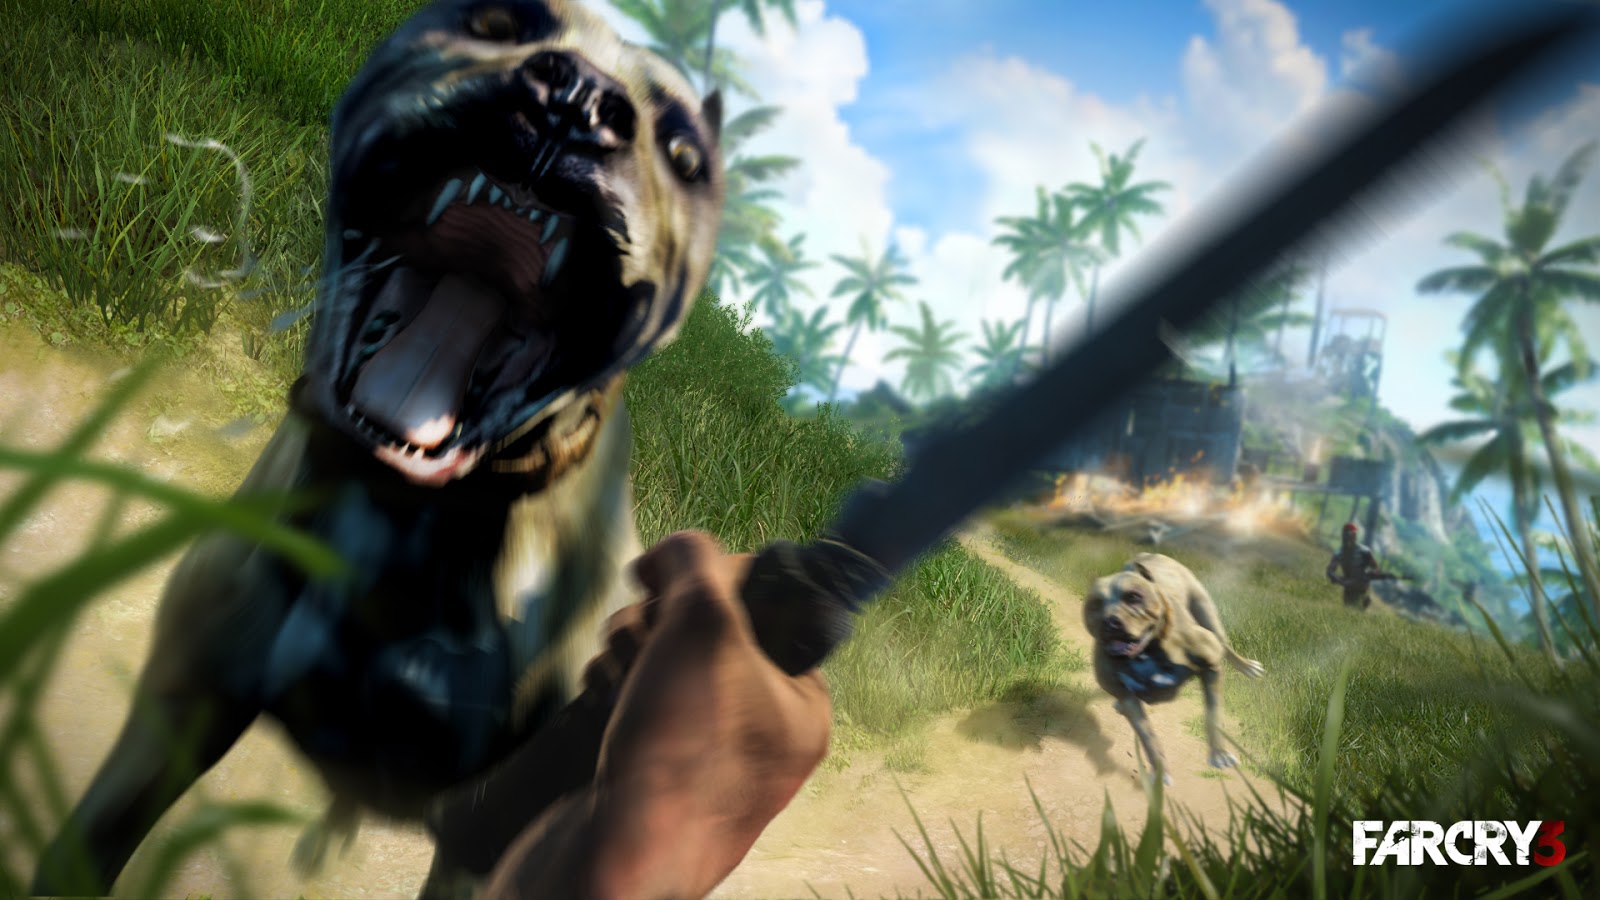 far cry 3 activation code for uplay free